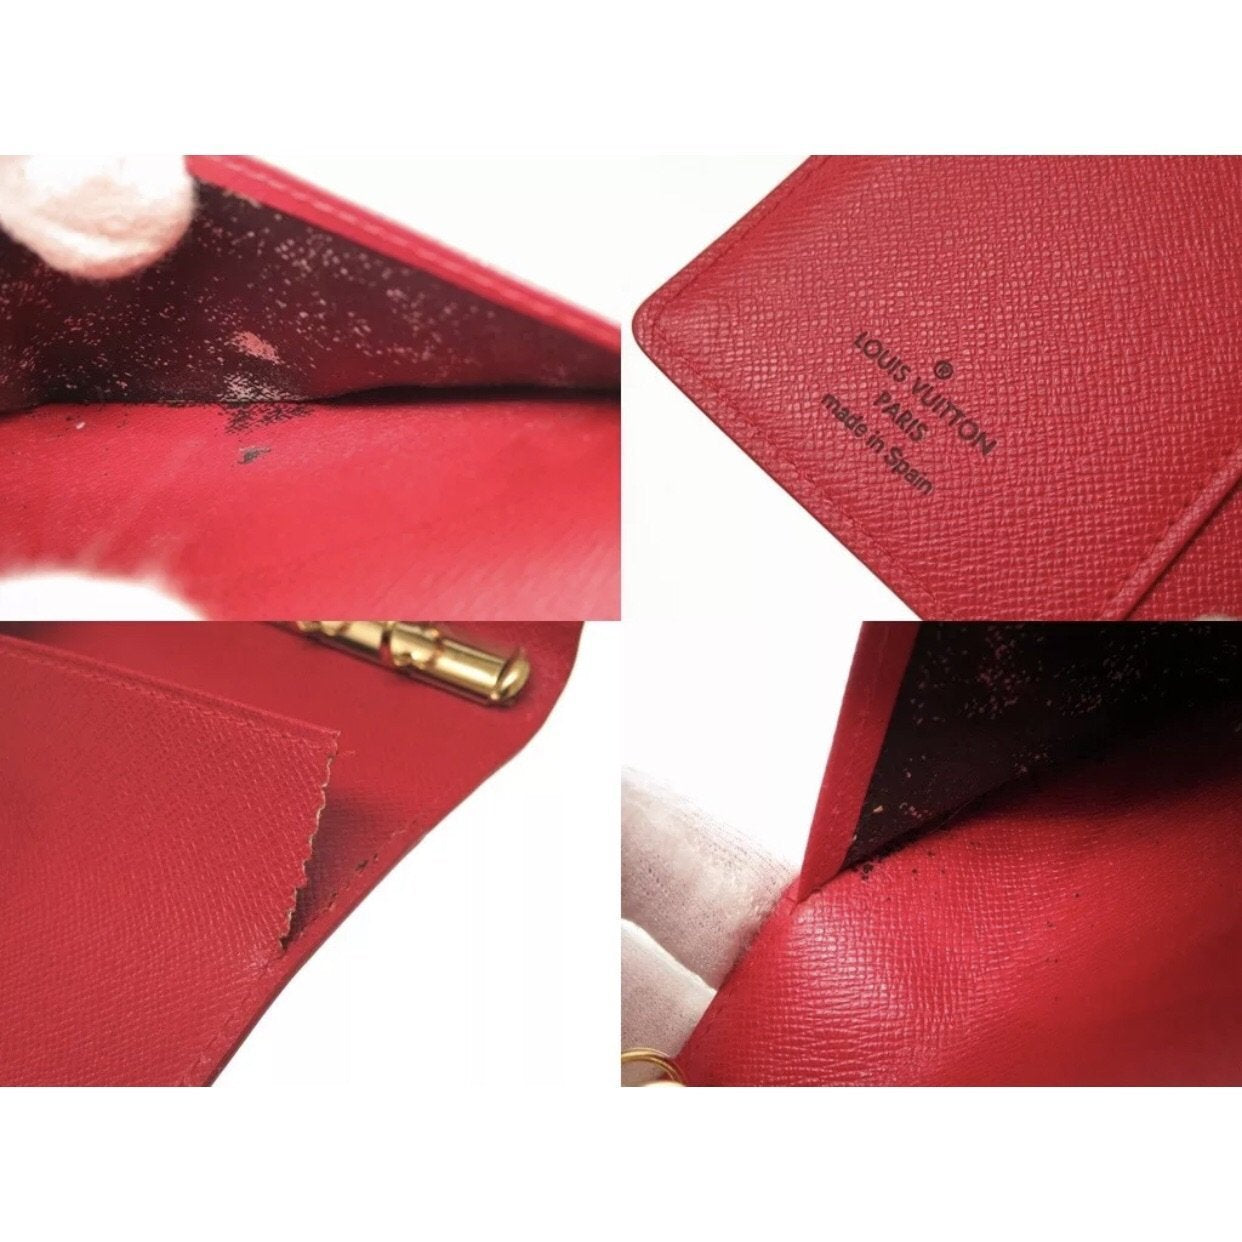 LOUIS VUITTON - OOATED EPI LEATHER AGENDA PM COVER